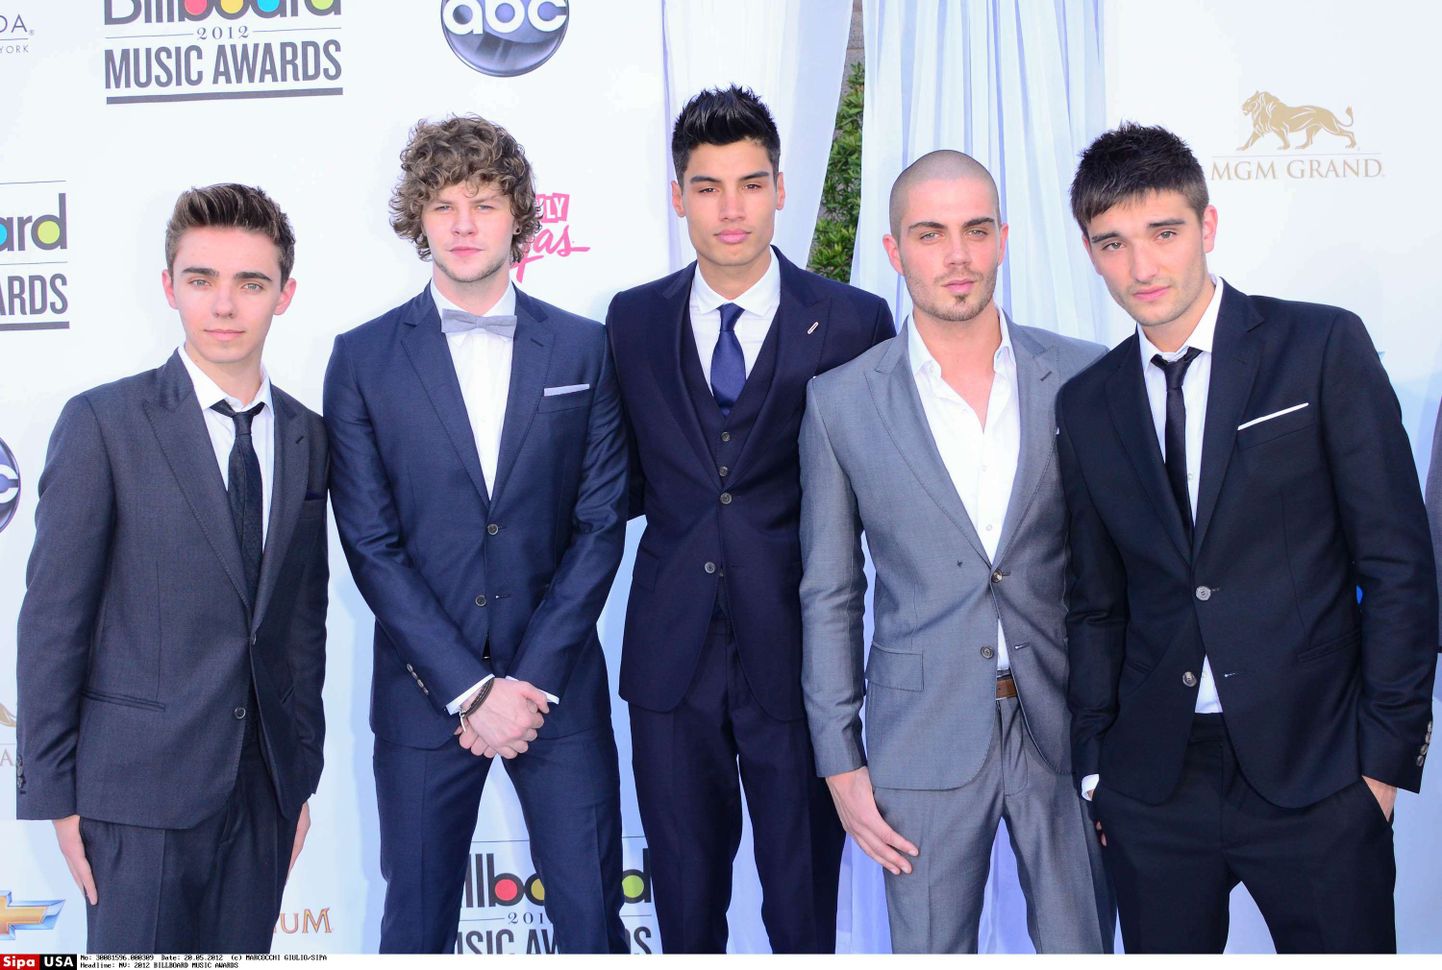 Briti bänd The Wanted